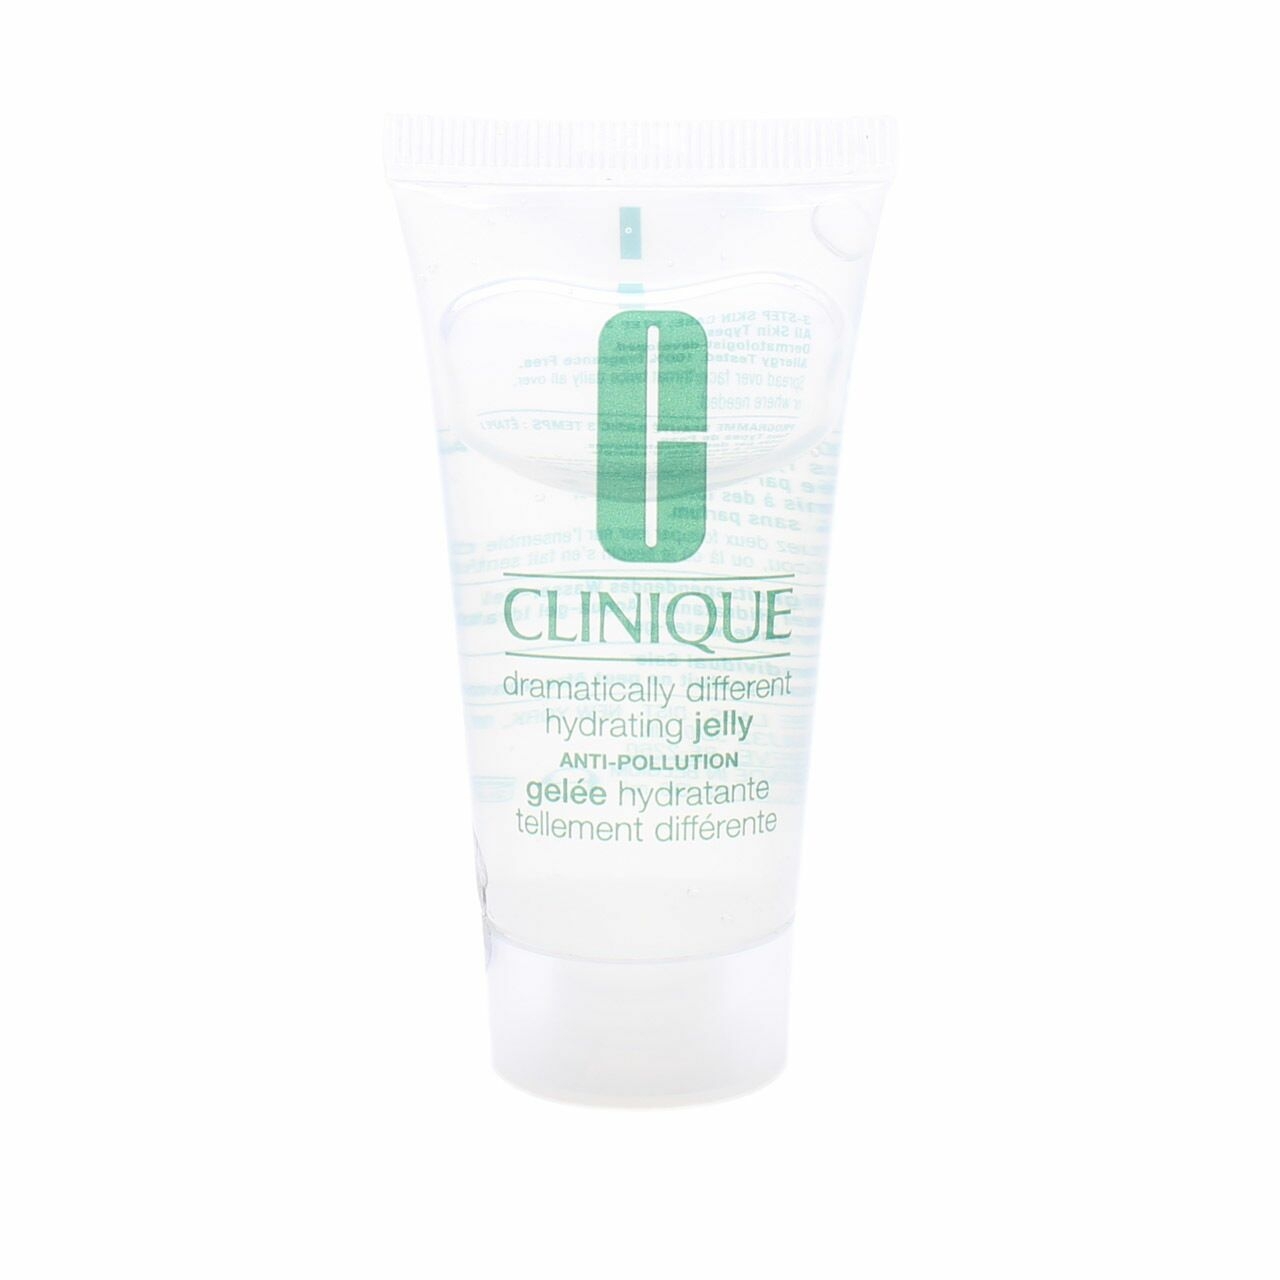 Clinique Dramatically Different Hydrating Jelly Skin Care